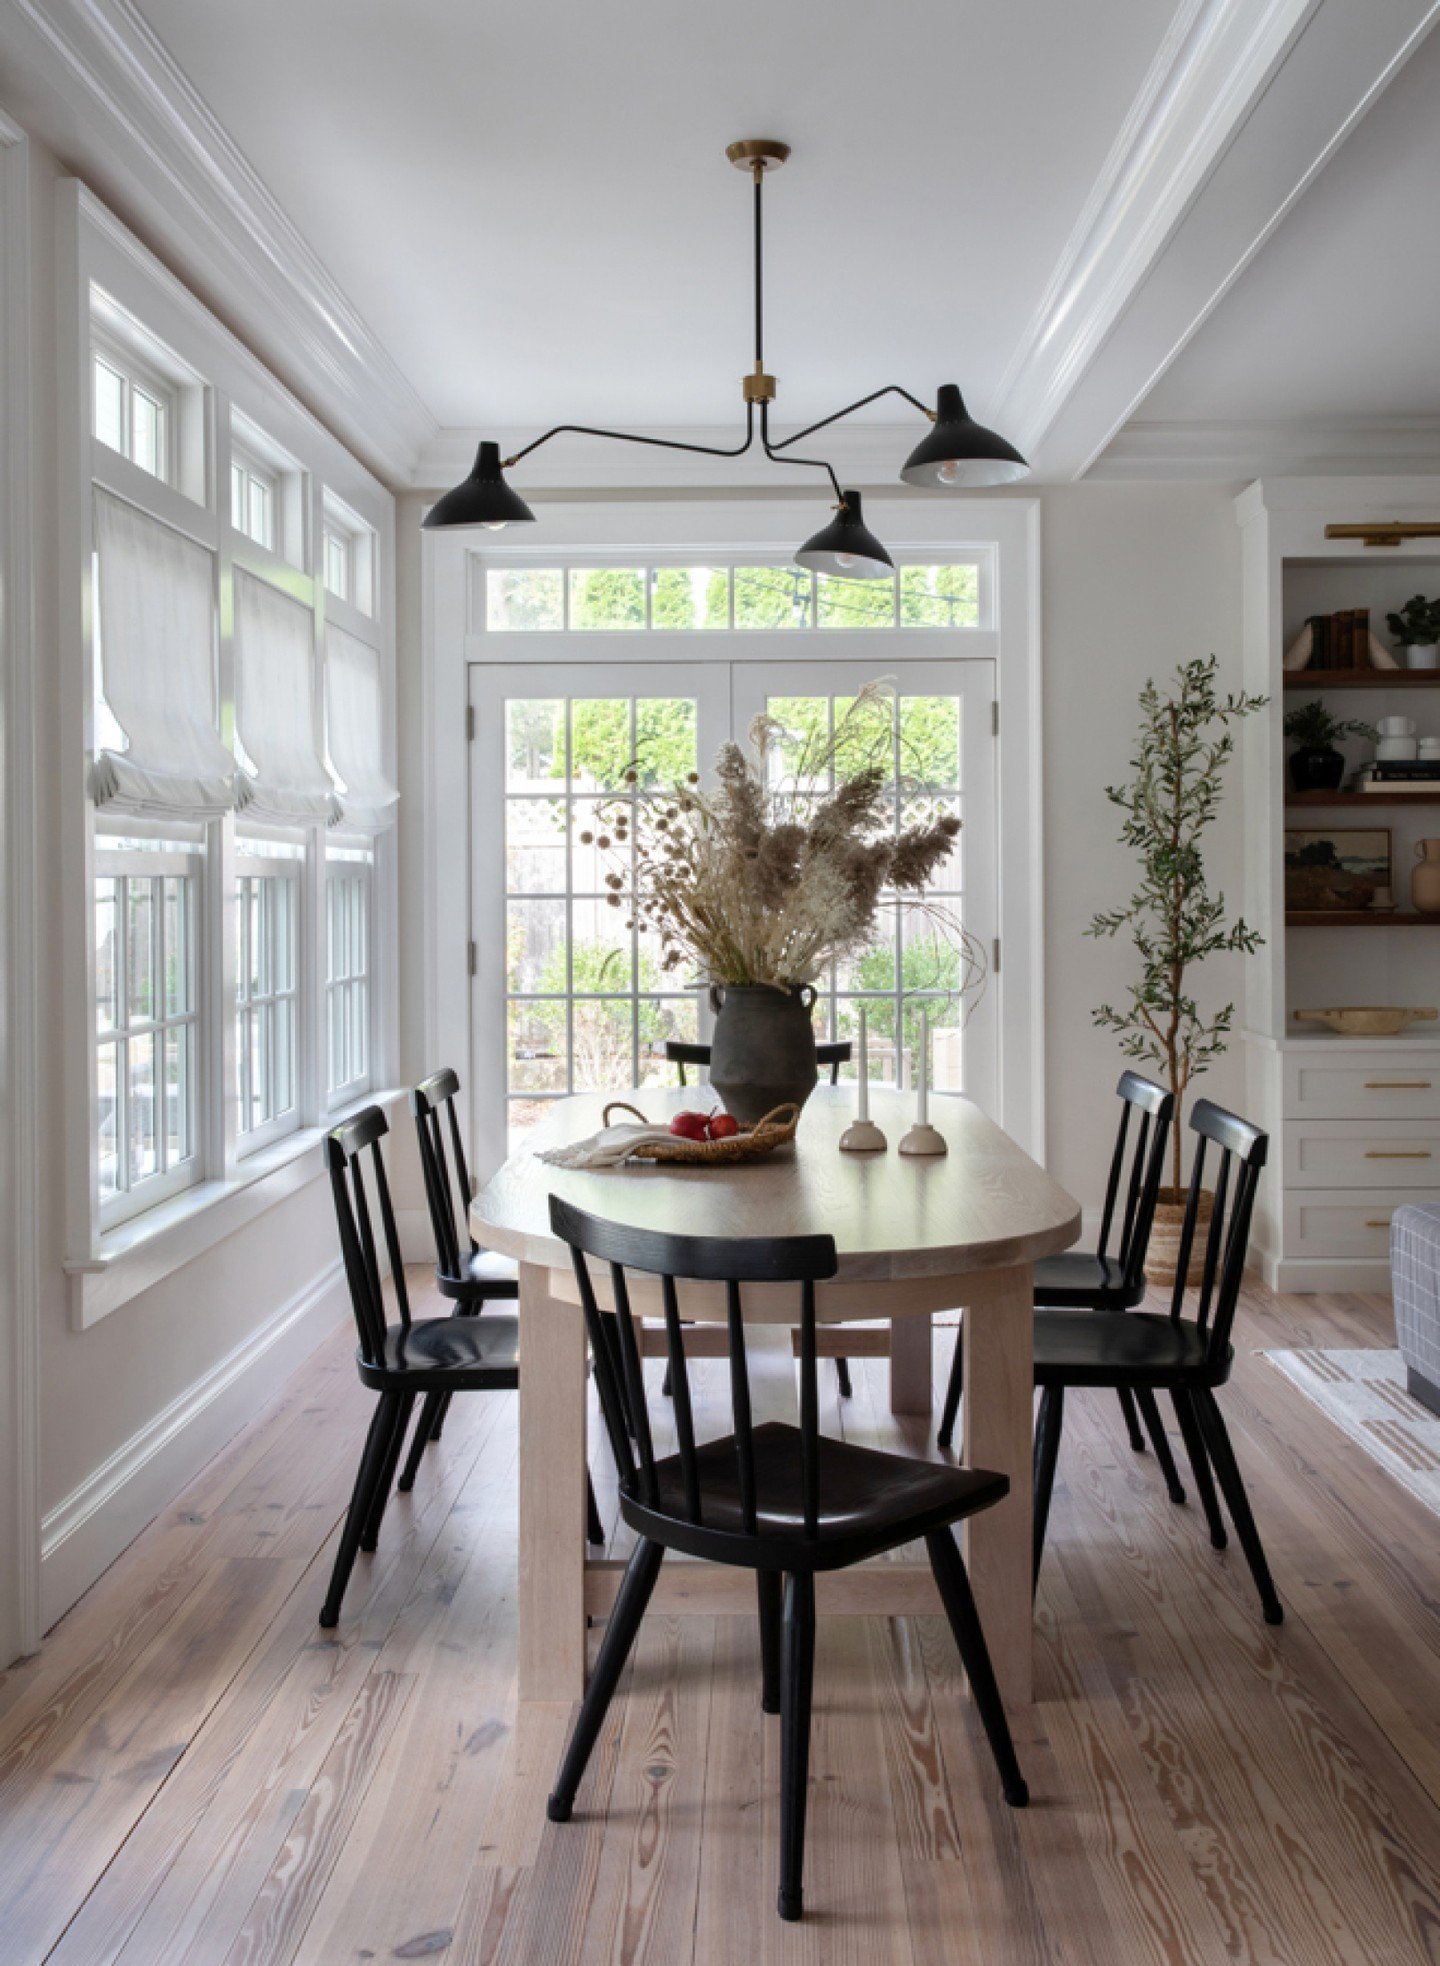 One of our favorite shots from our Woodmont Project.  The perfect balance of warm wood tones and black modern accents. The beauty of this dining space is that it is both beautiful AND functional.  The young family of five needed a casual dining areas